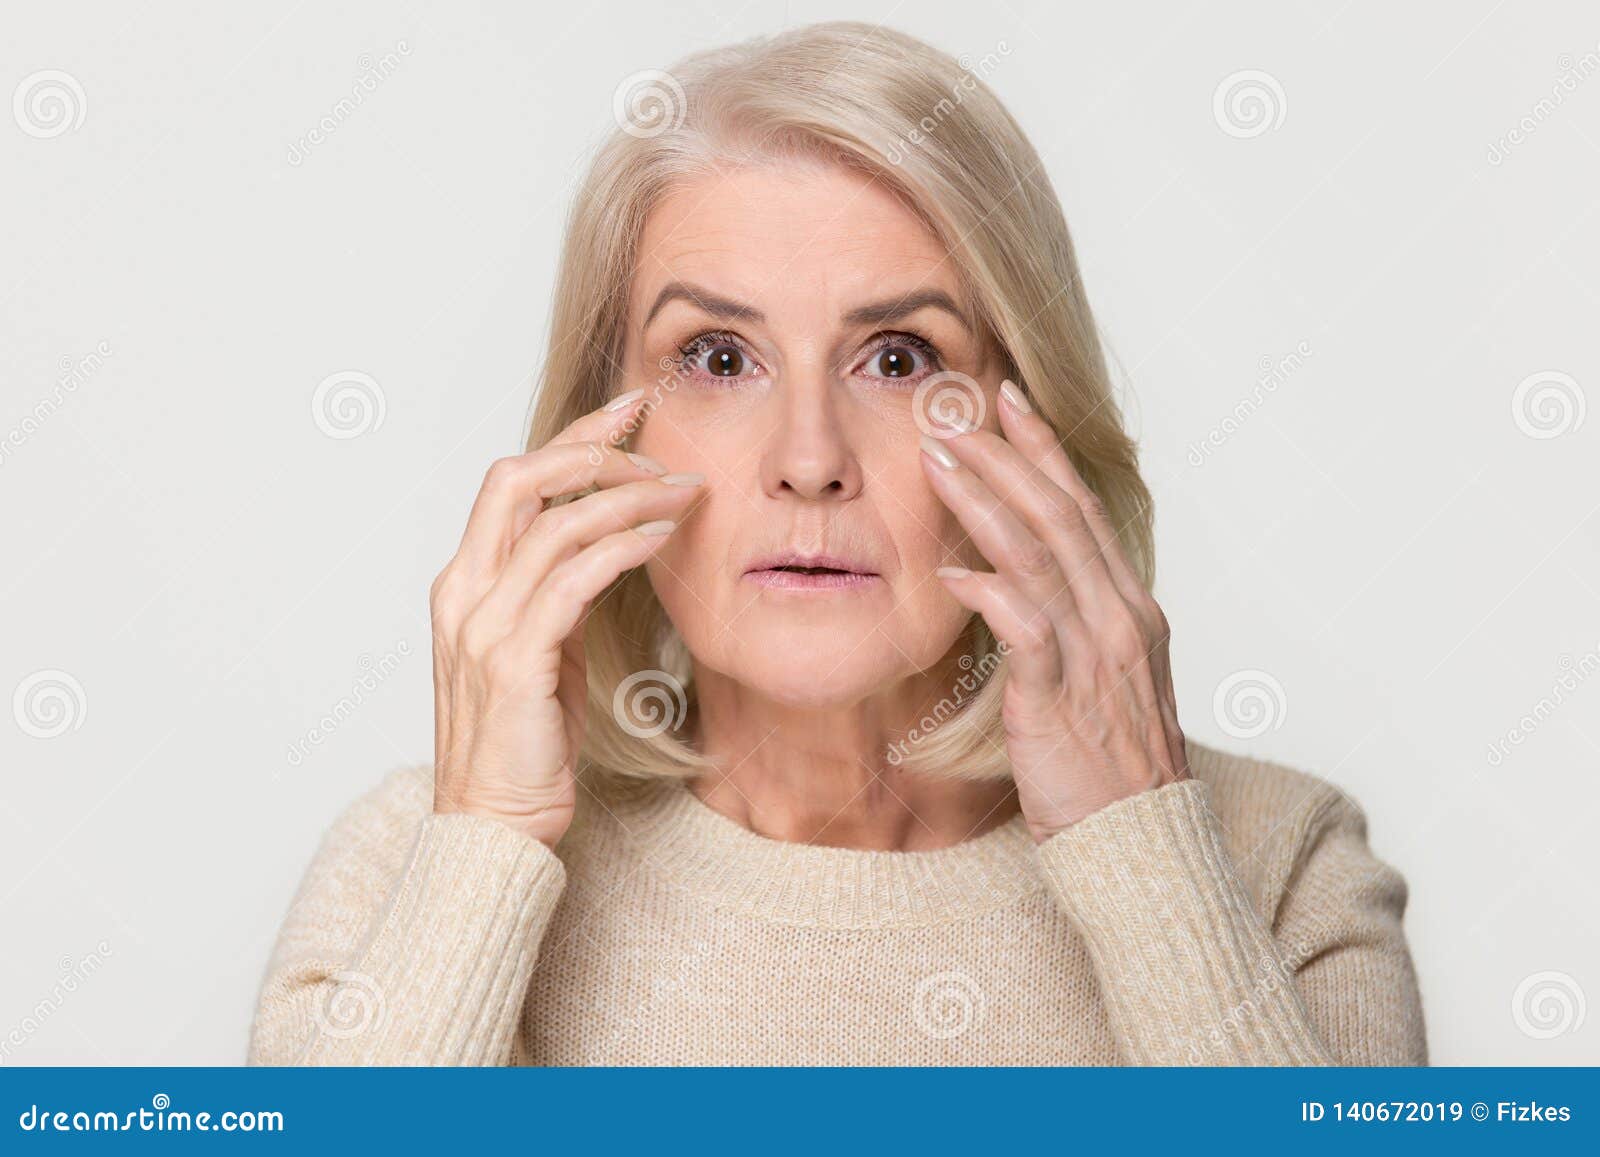 old mature woman looking at camera worried about face wrinkles